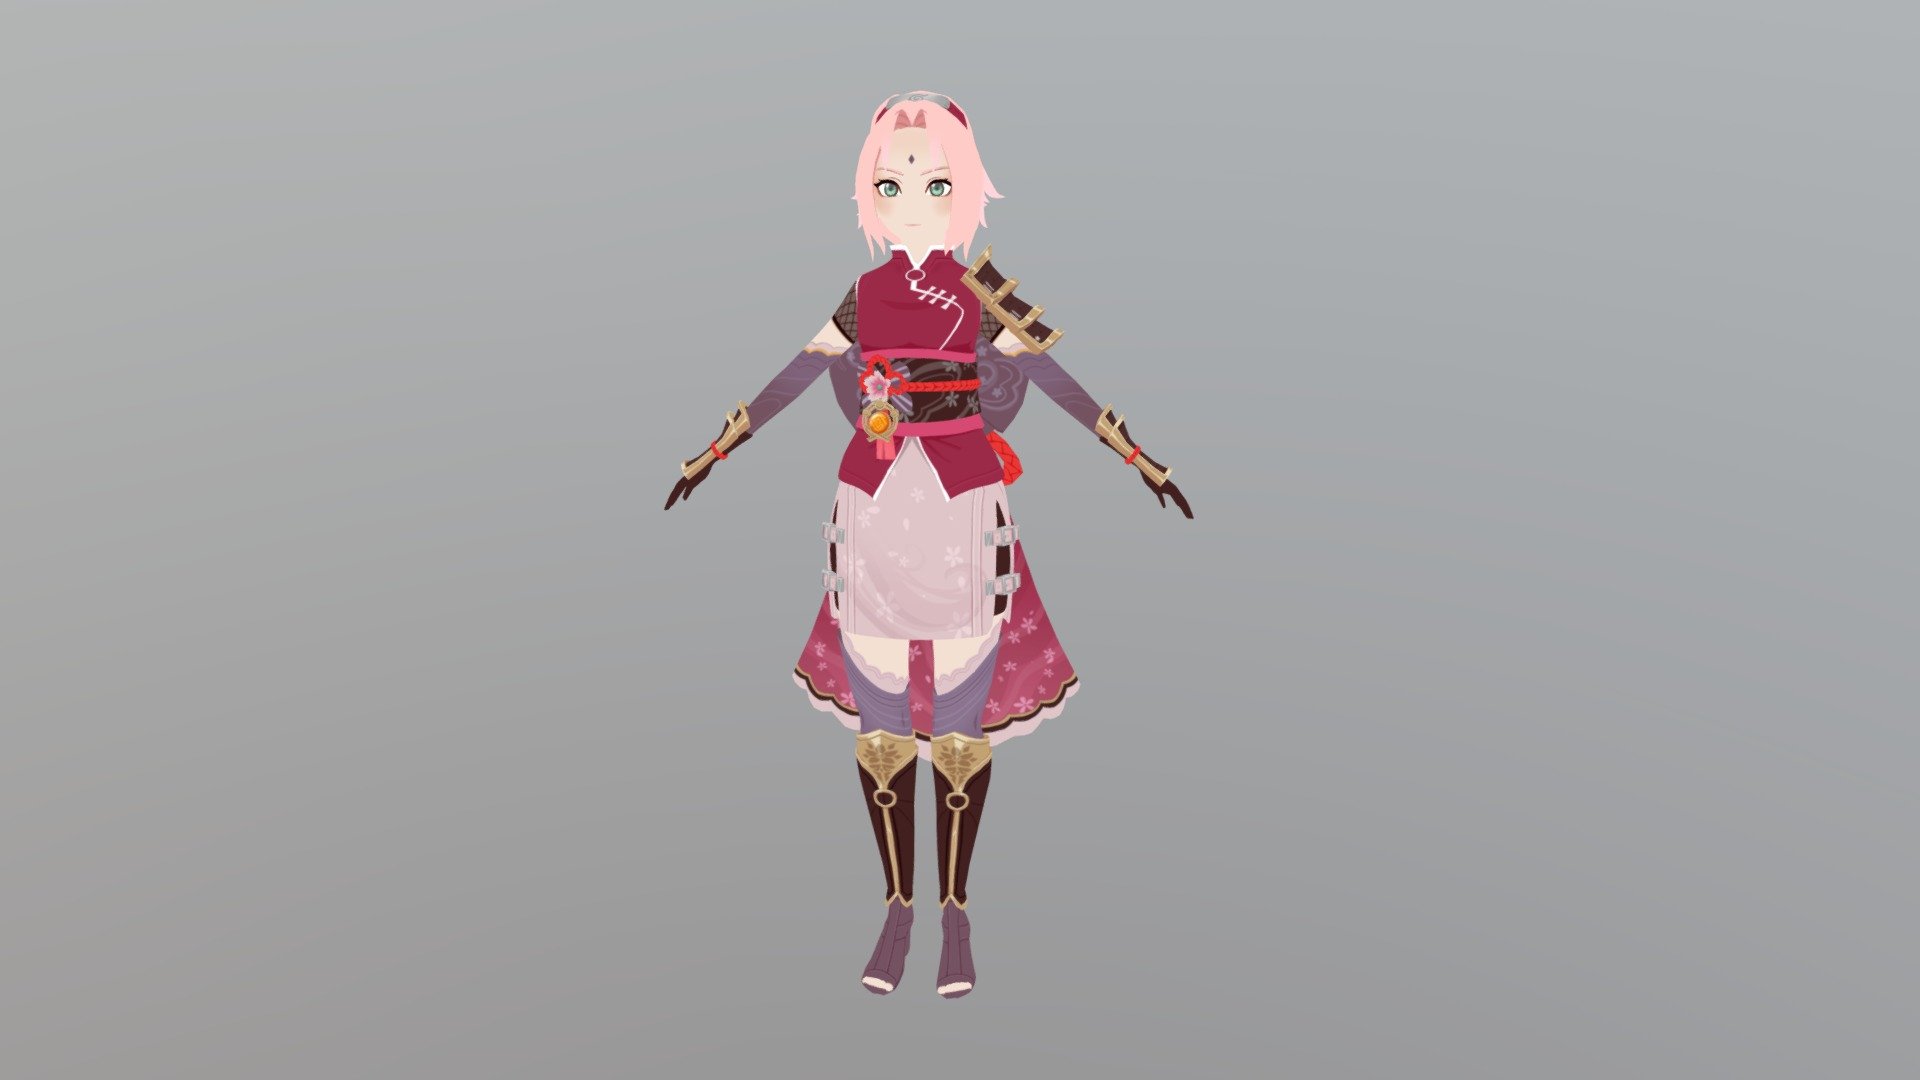 Fan Art of Sakura Haruno from Naruto! I wanted to try making a Genshin Impact inspired 3D character 3d model